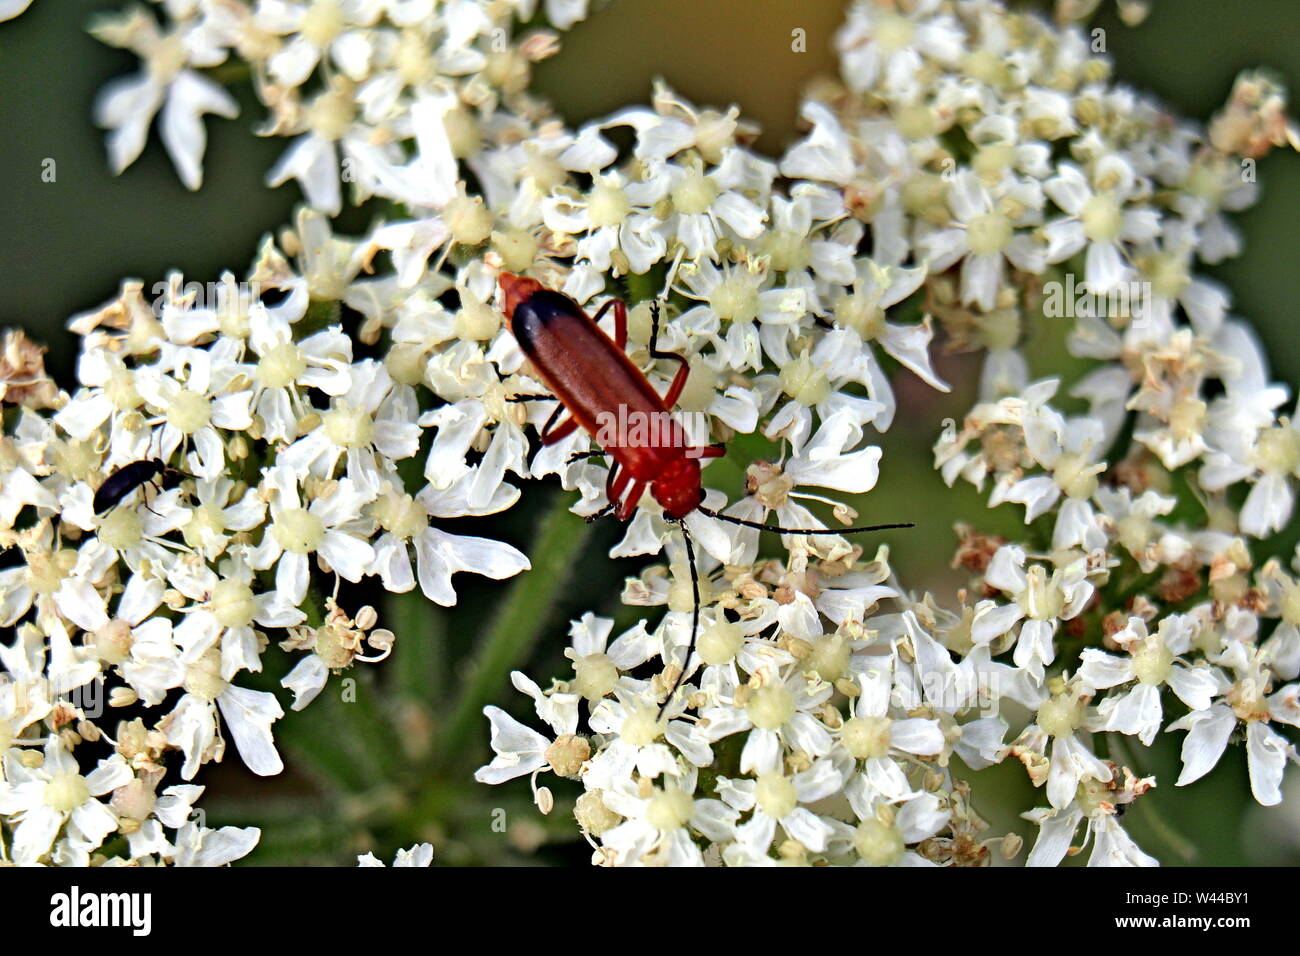 Common red soldier beetle, Rhagonycha fulva, also misleadingly known as the bloodsucker beetle, and popularly known in England as the Hogweed Bonking Stock Photo